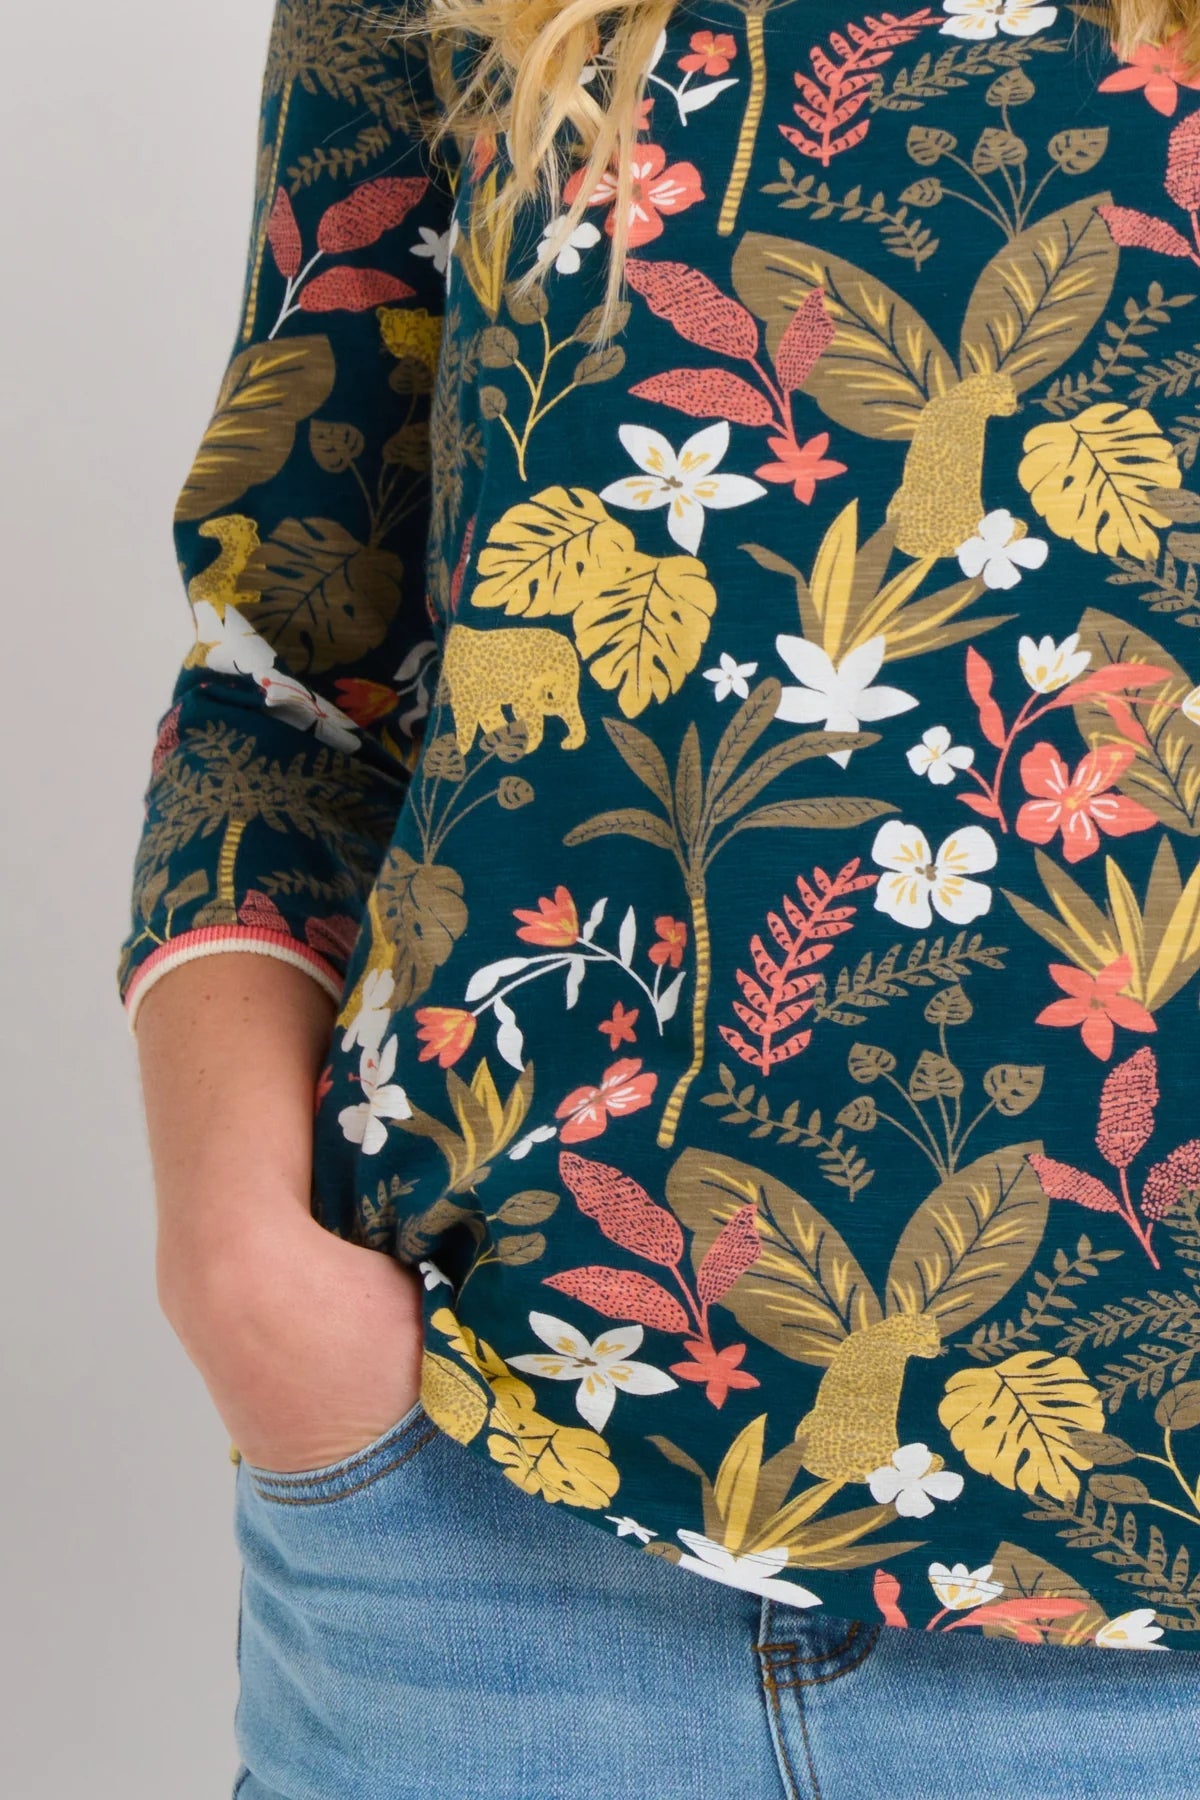 A jungle style floral print womens t-shirt with three quarter length sleeves from Brakeburn